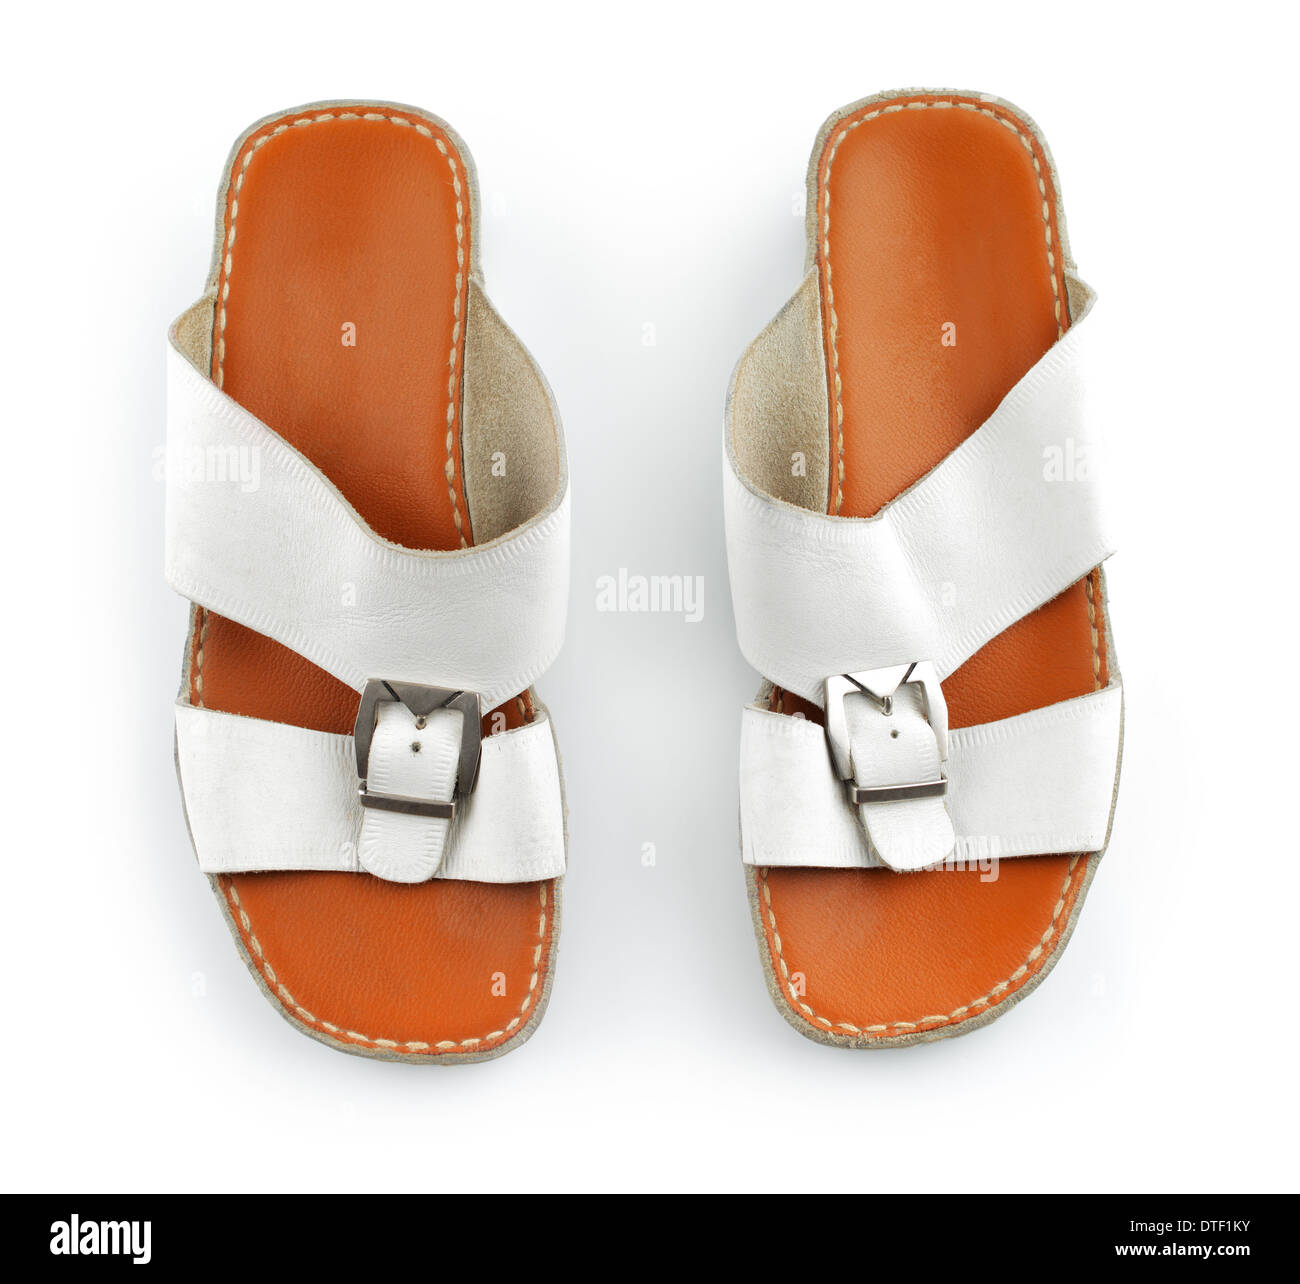 Traditional sandals shot against a white background Photo -